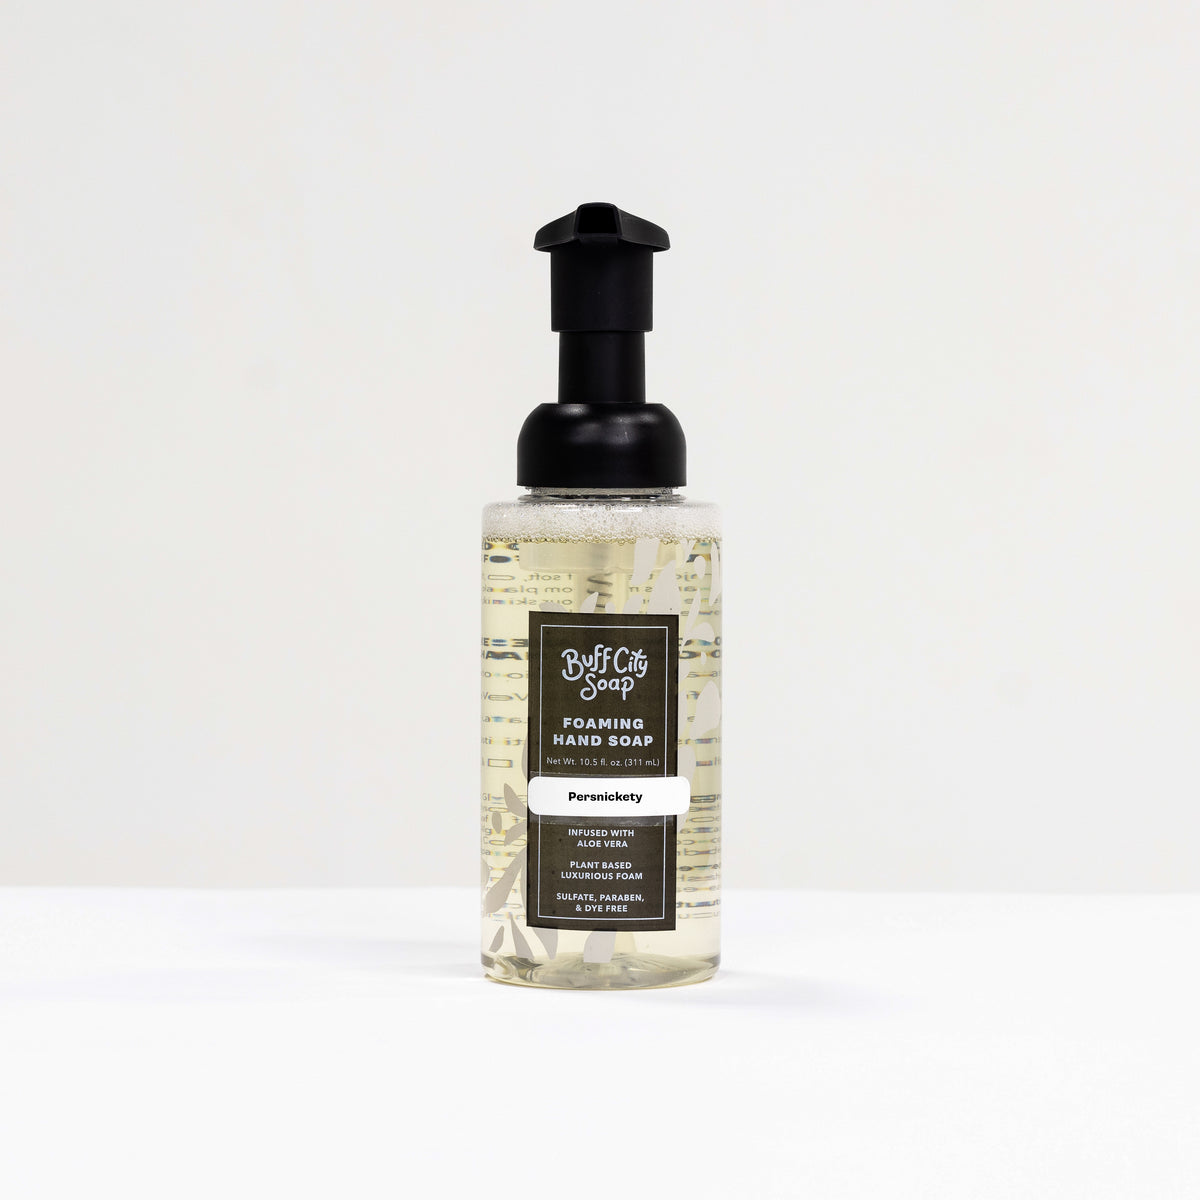 Persnickety Foaming Hand Soap